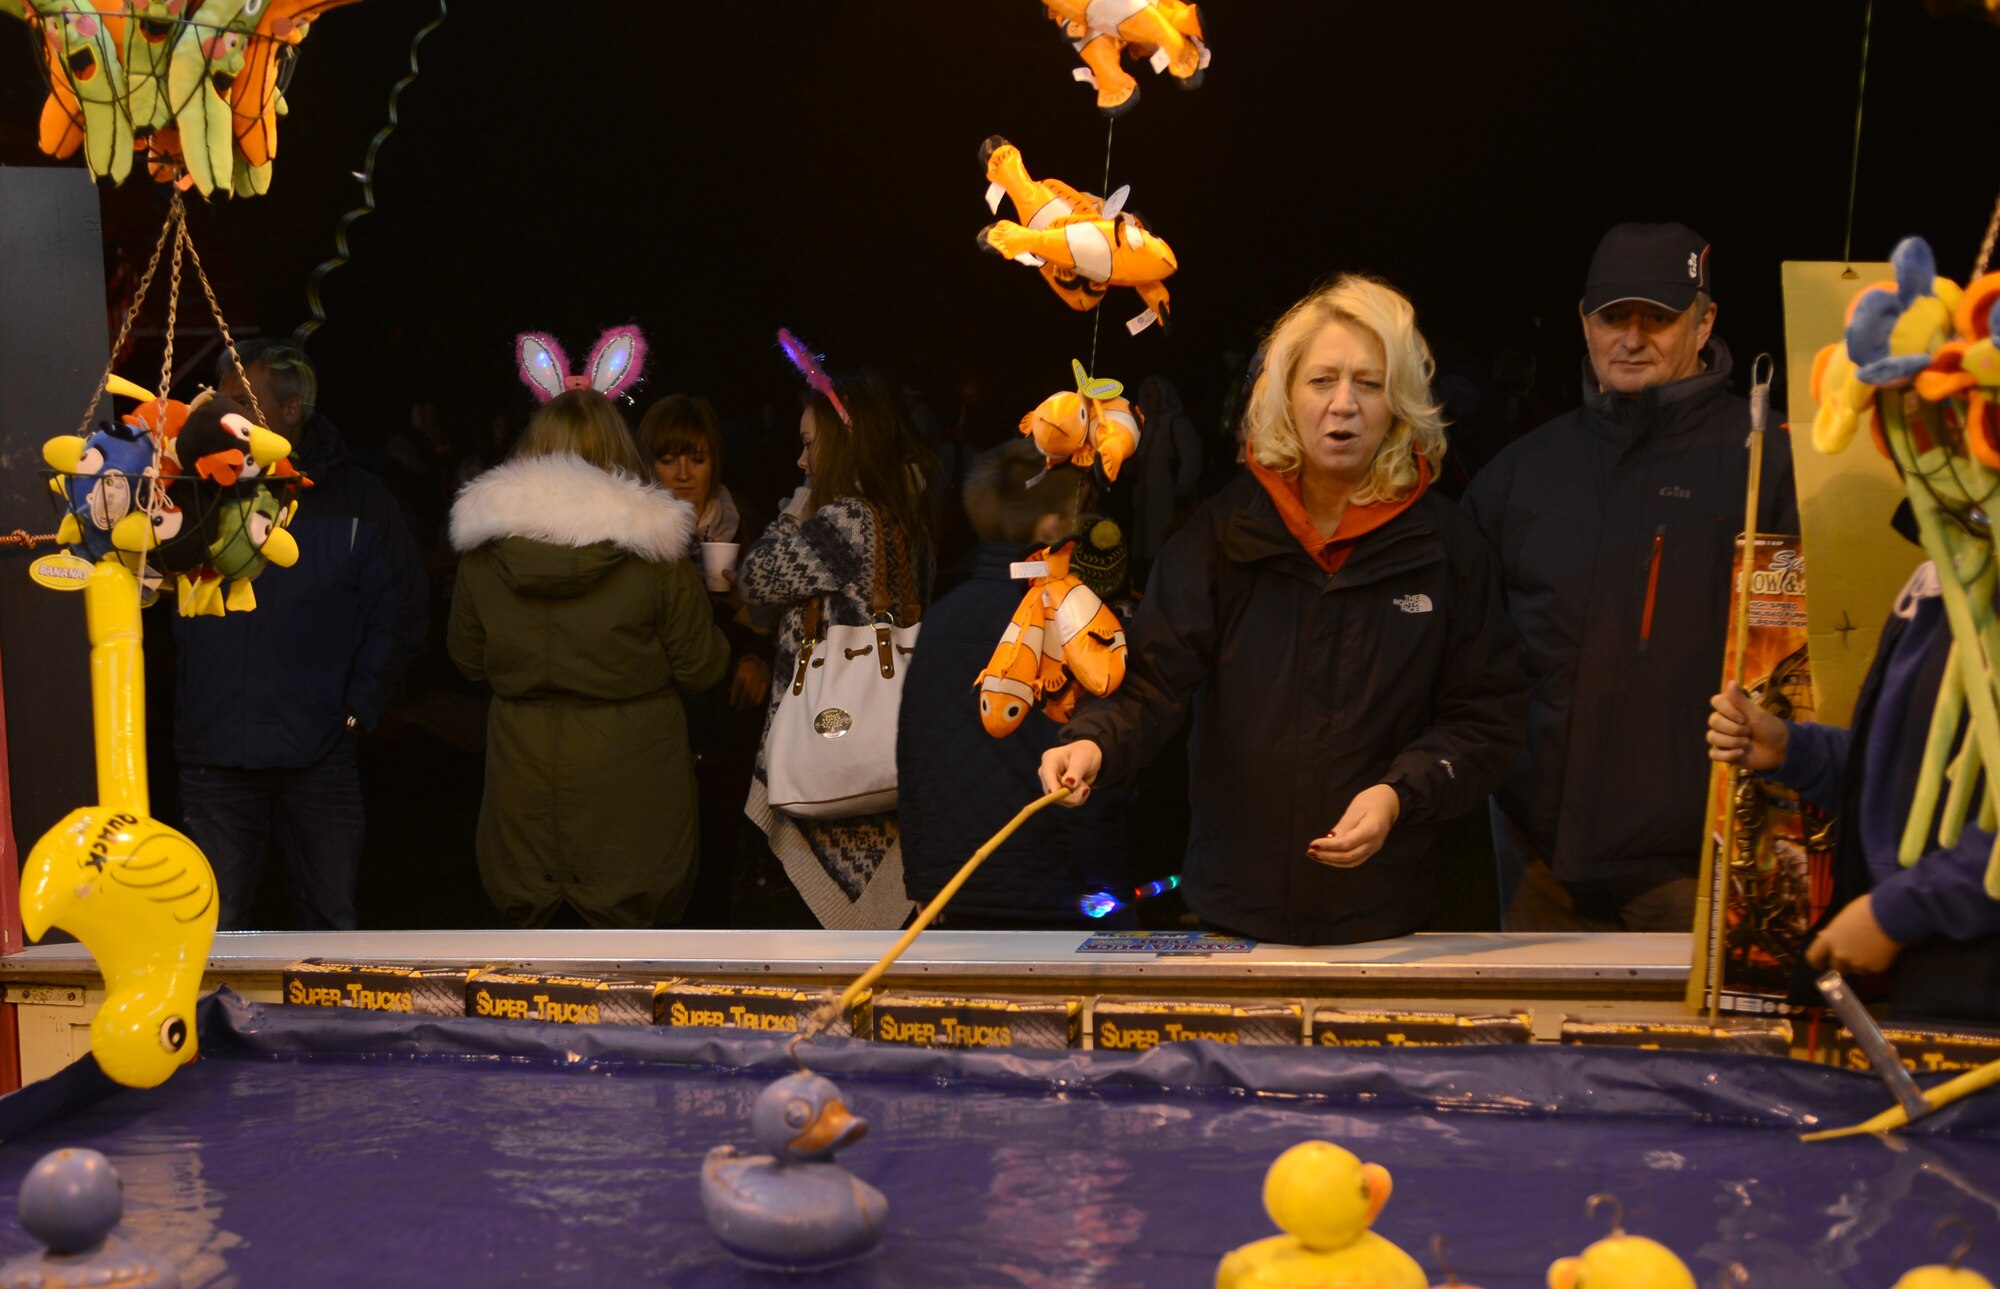 A fairgoer plays a duck-fishing game during a Bonfire Night celebration Nov. 2, 2013, at the Abbey Gardens in Bury St. Edmunds, England. There was a fair held with prizes and games during the celebration. Team Mildenhall members helped patrol the grounds to ensure people were abiding by the rules and not getting too close to the fireworks. (U.S. Air Force photo by Airman 1st Class Dillon Johnston/Released)